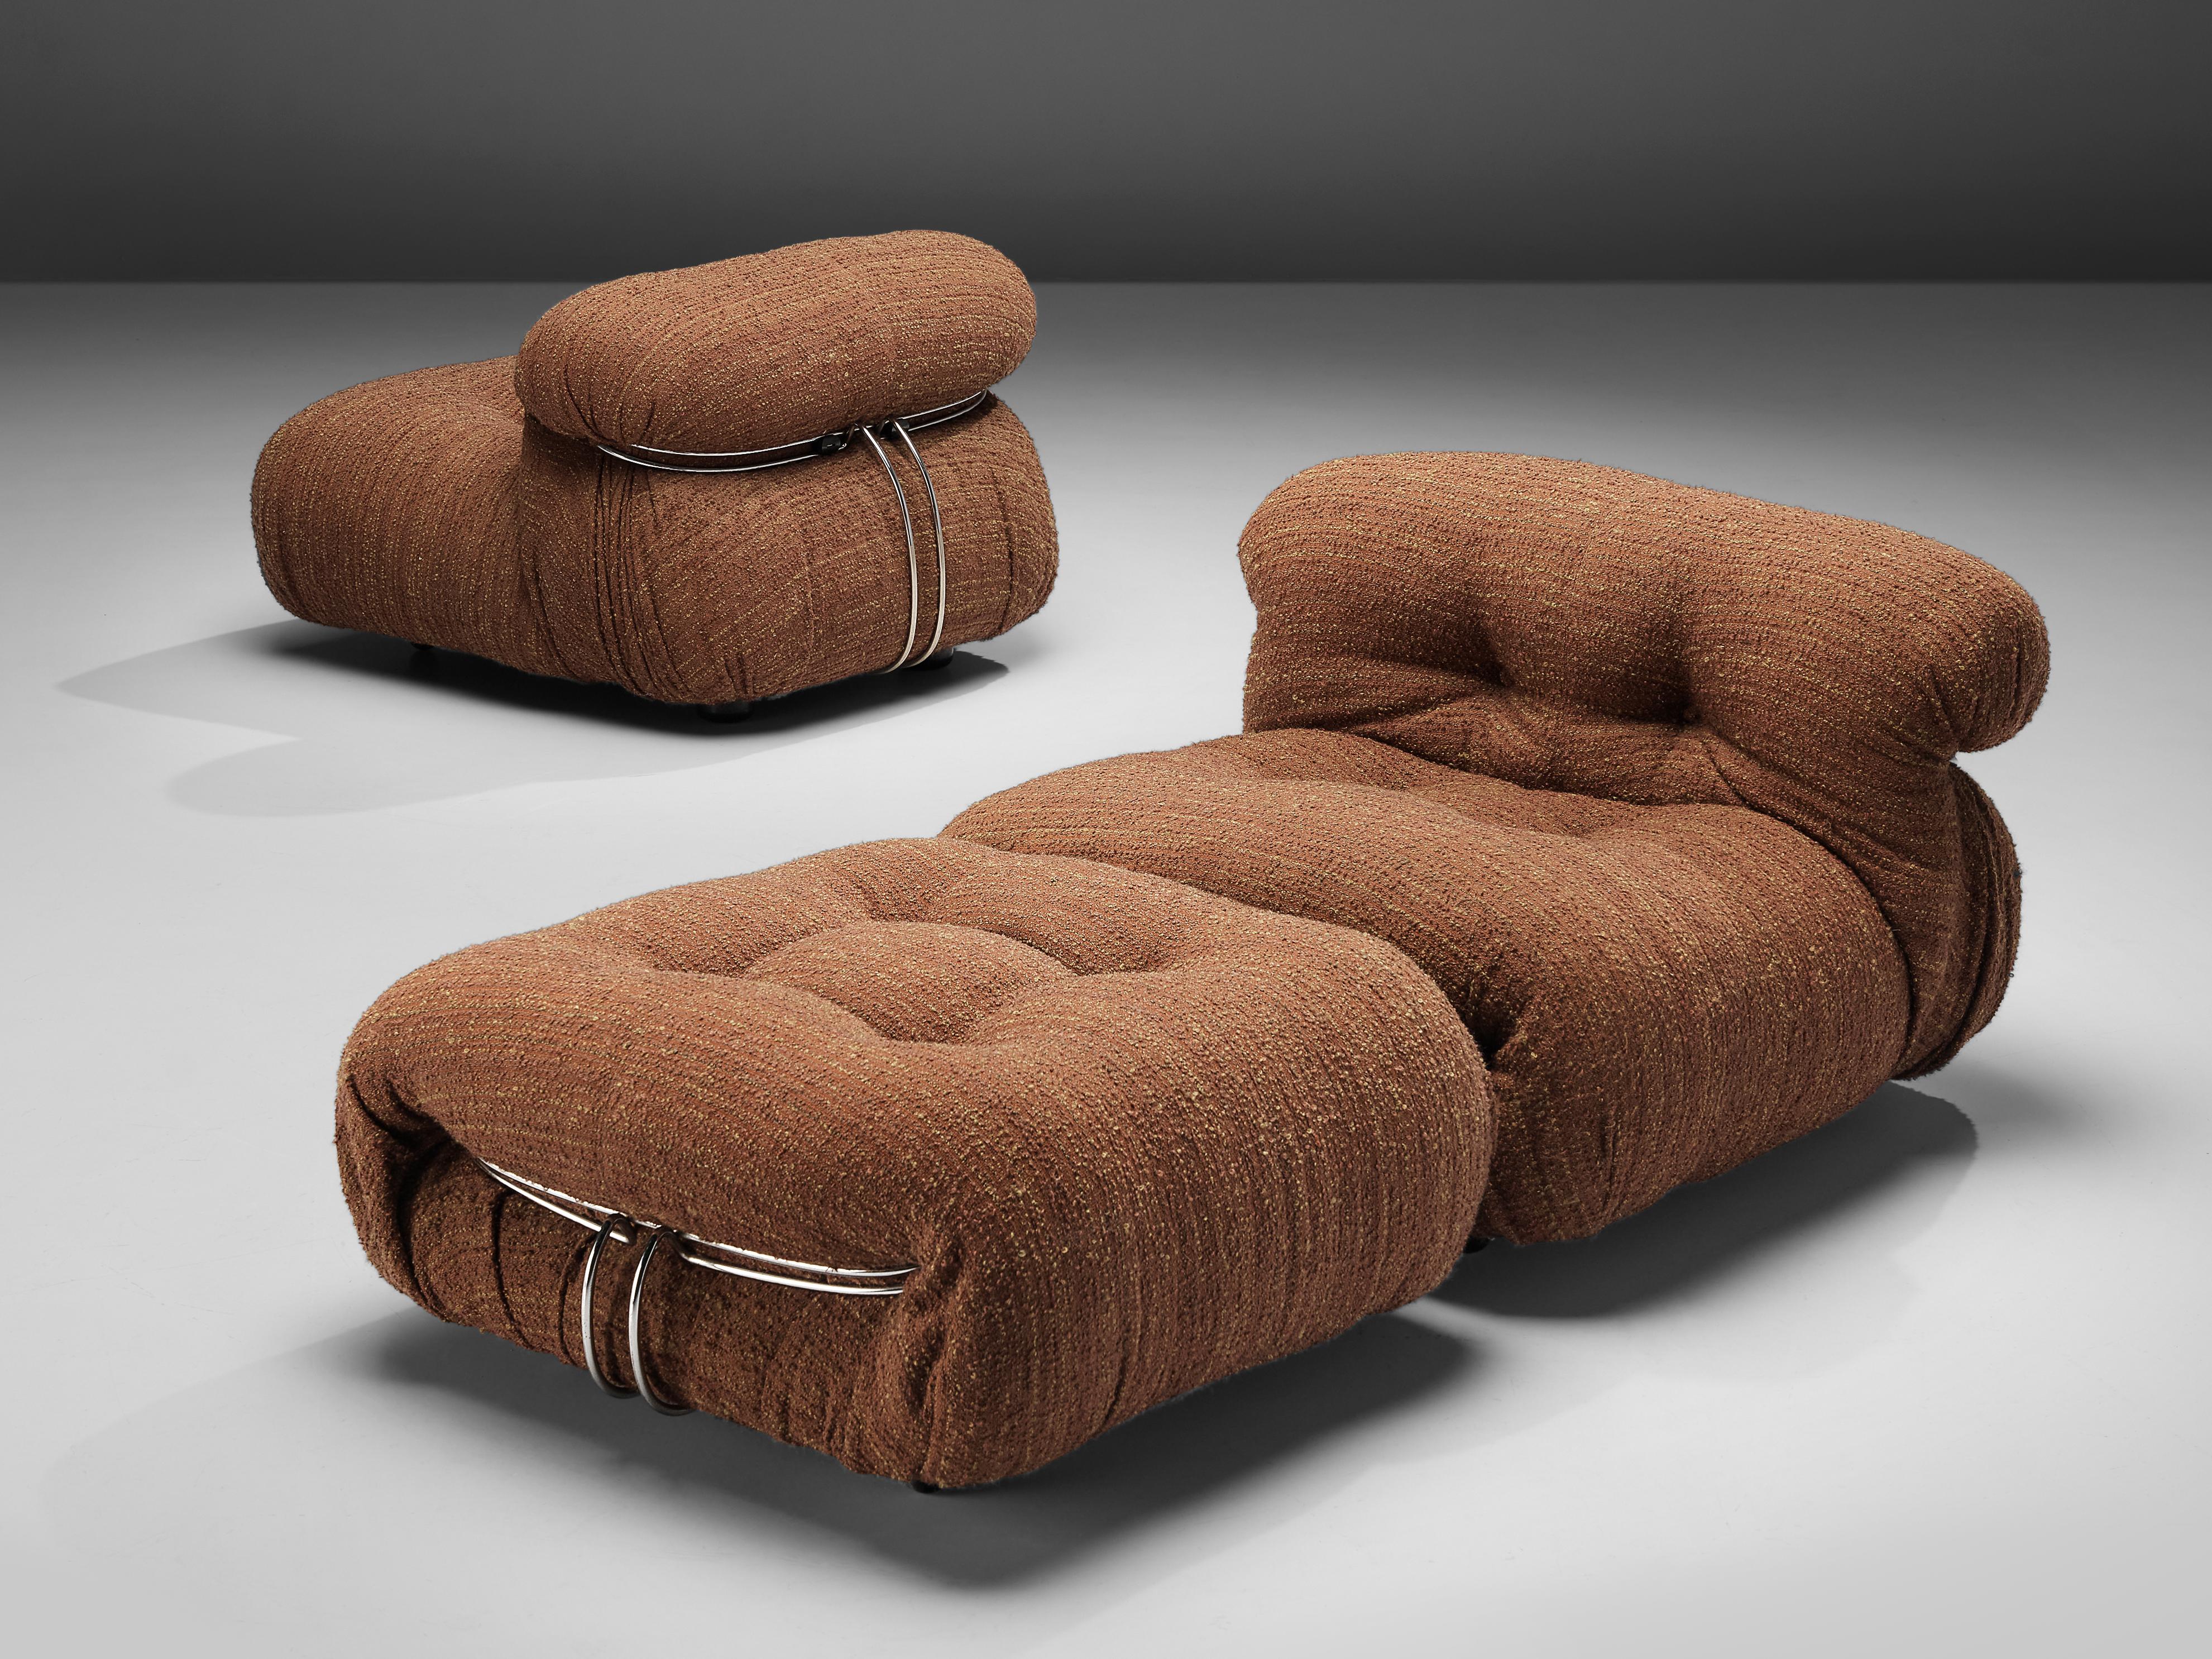 Afra & Tobia Scarpa for Cassina, 'Soriana' lounge chairs with ottoman, brown upholstery, metal, Italy, 1969

Iconic lounge chairs by Italian designer couple Afra & Tobia Scarpa. The 'Soriana' proposes a model that institutionalizes the image of the